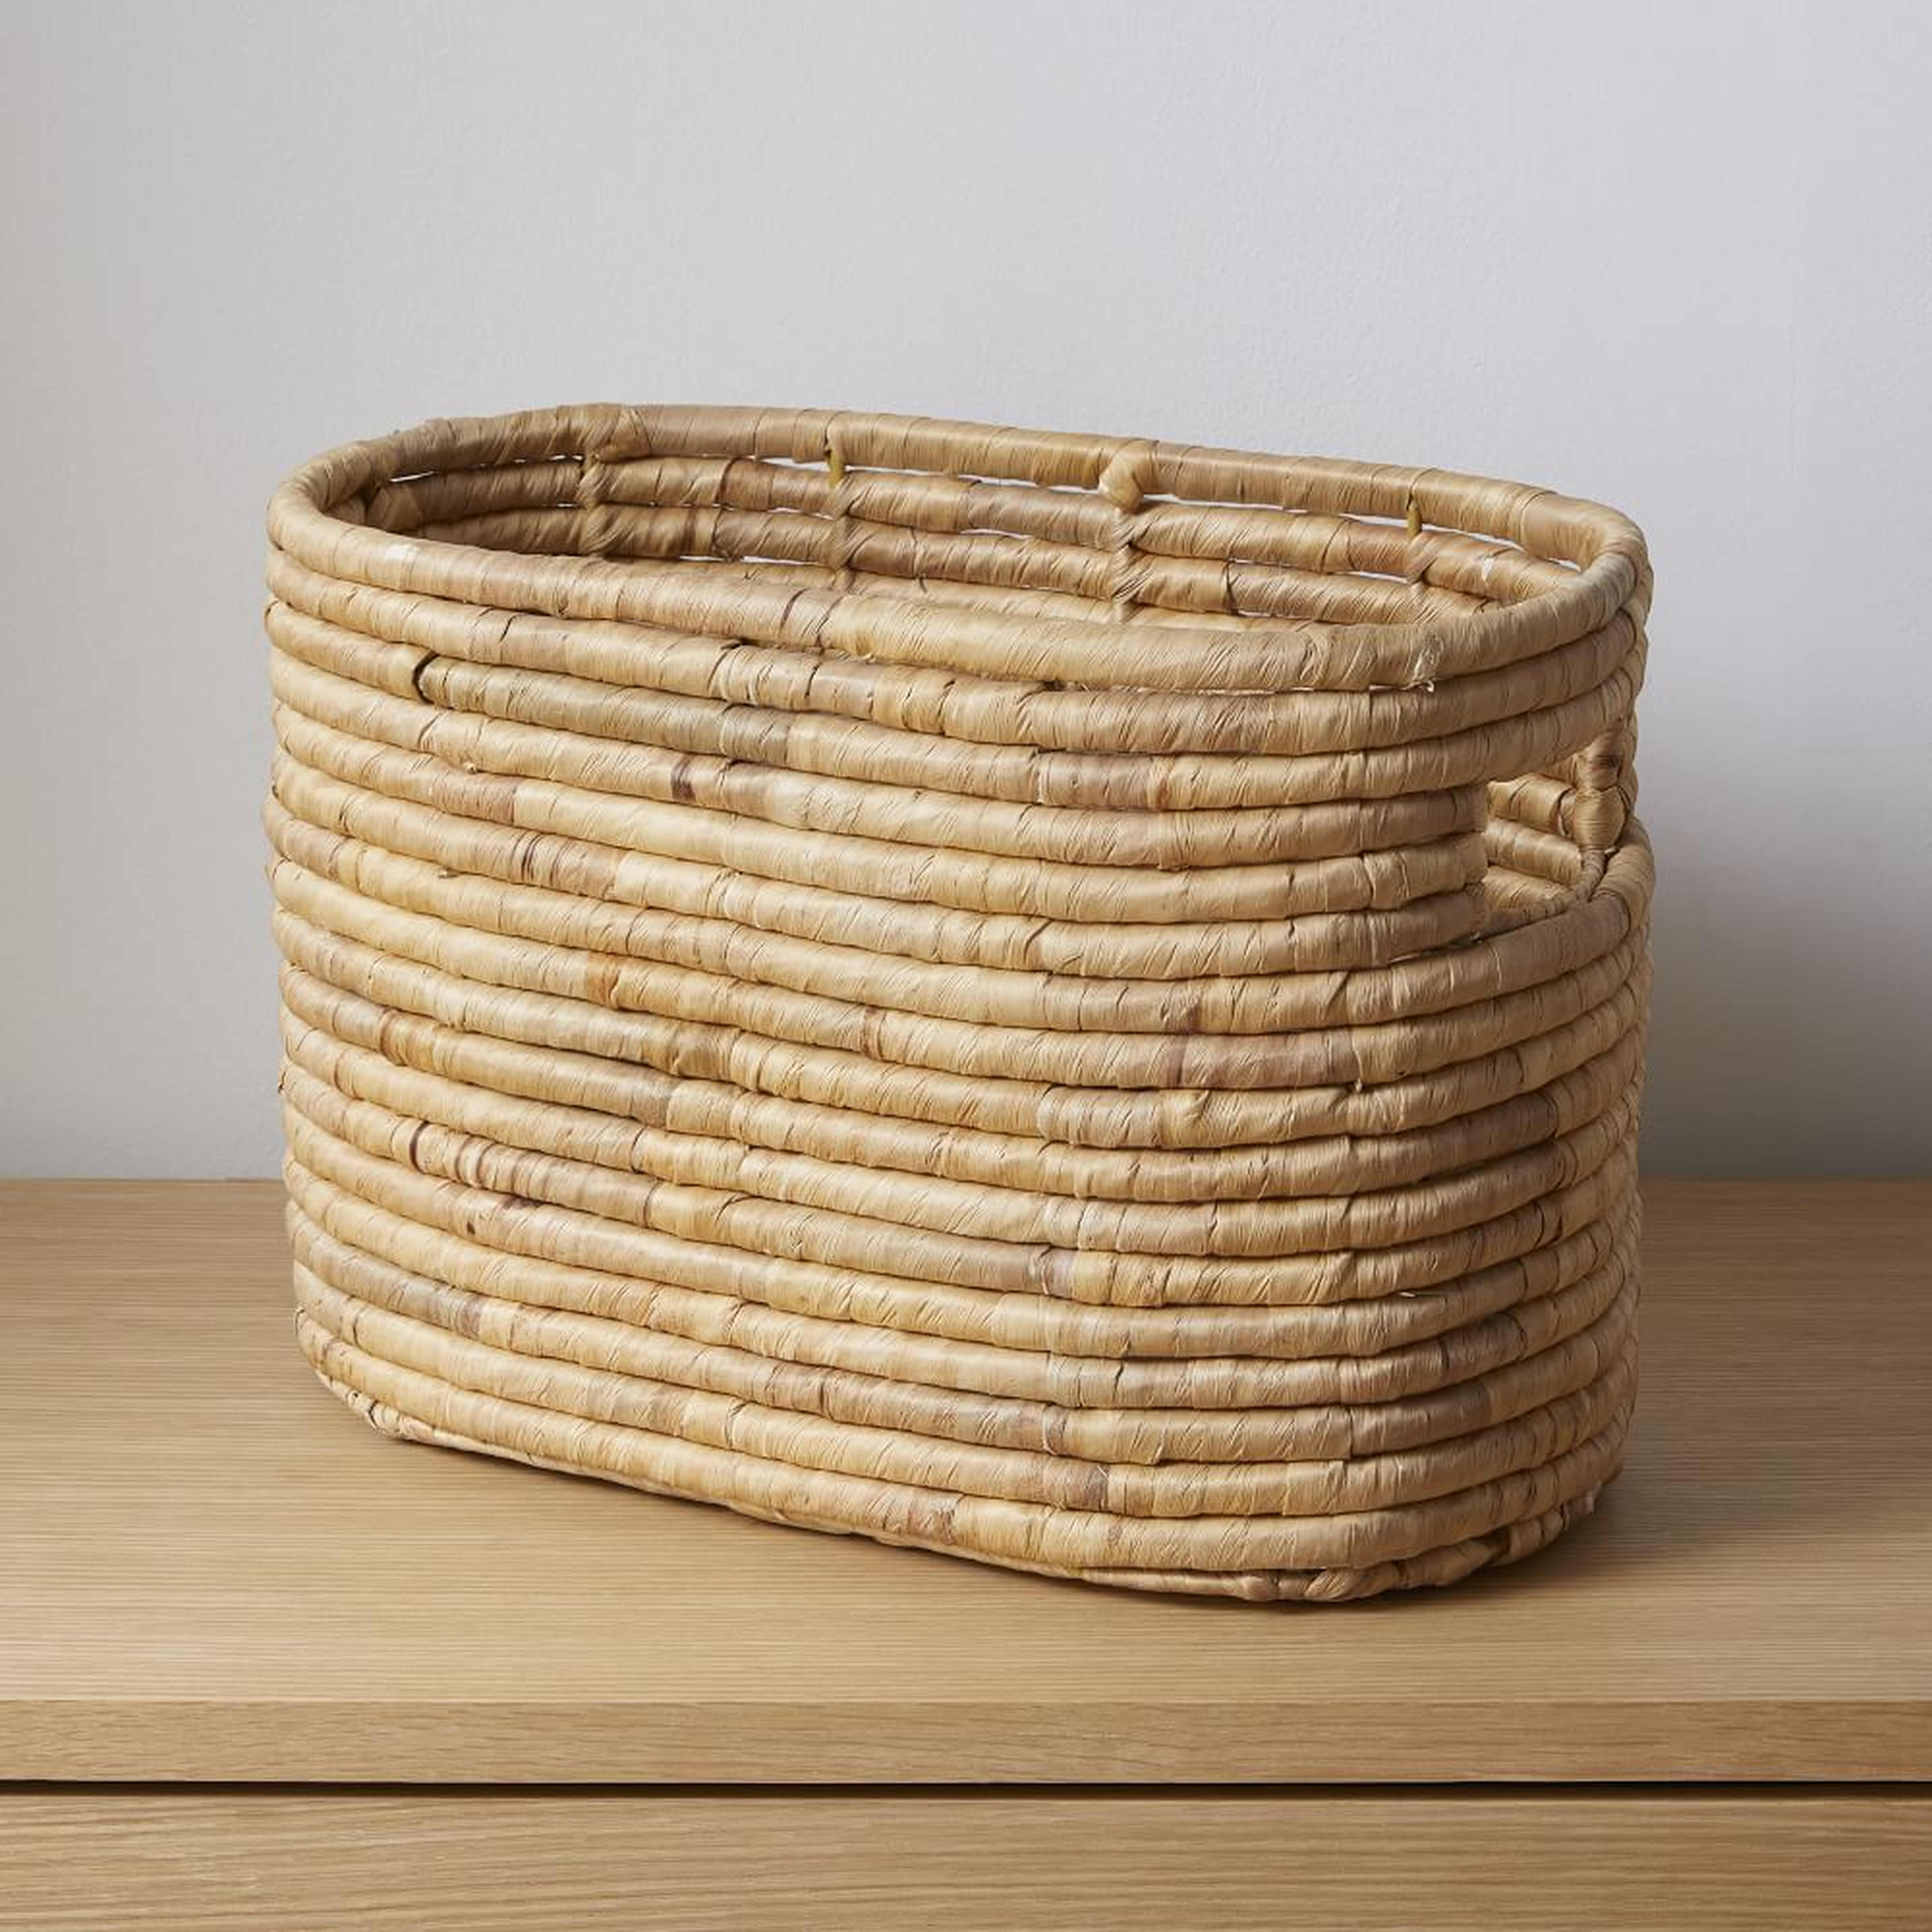 Woven Seagrass Basket, Magazine, Natural - West Elm